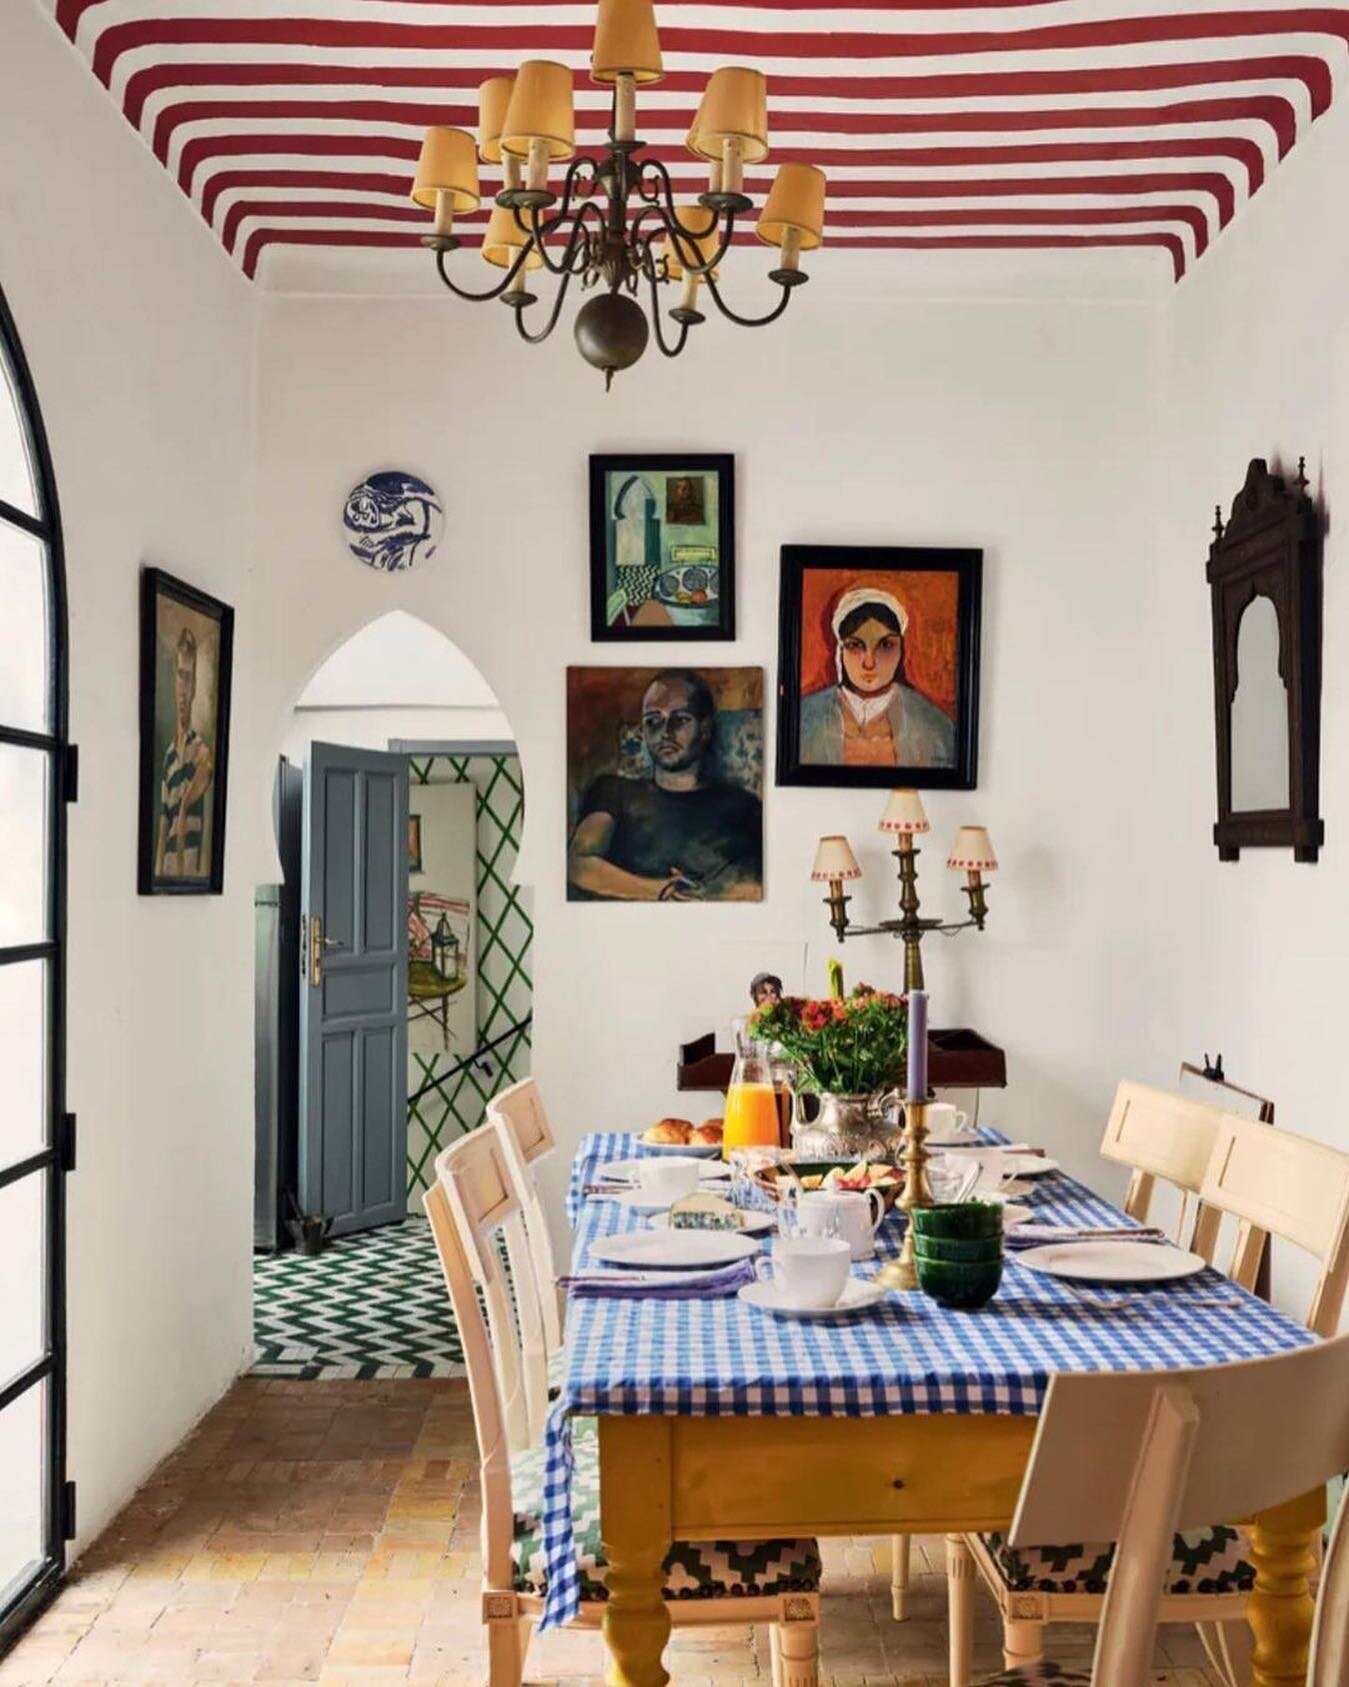 Interior designer, ceramicist and artist Gavin Houghton's home in Tangier.

Gavin&rsquo;s style is mainly influenced by the Bloomsbury group, Picasso and Jean Cocteau, but he sources inspiration from anywhere and everywhere.

Houghton&rsquo;s journey